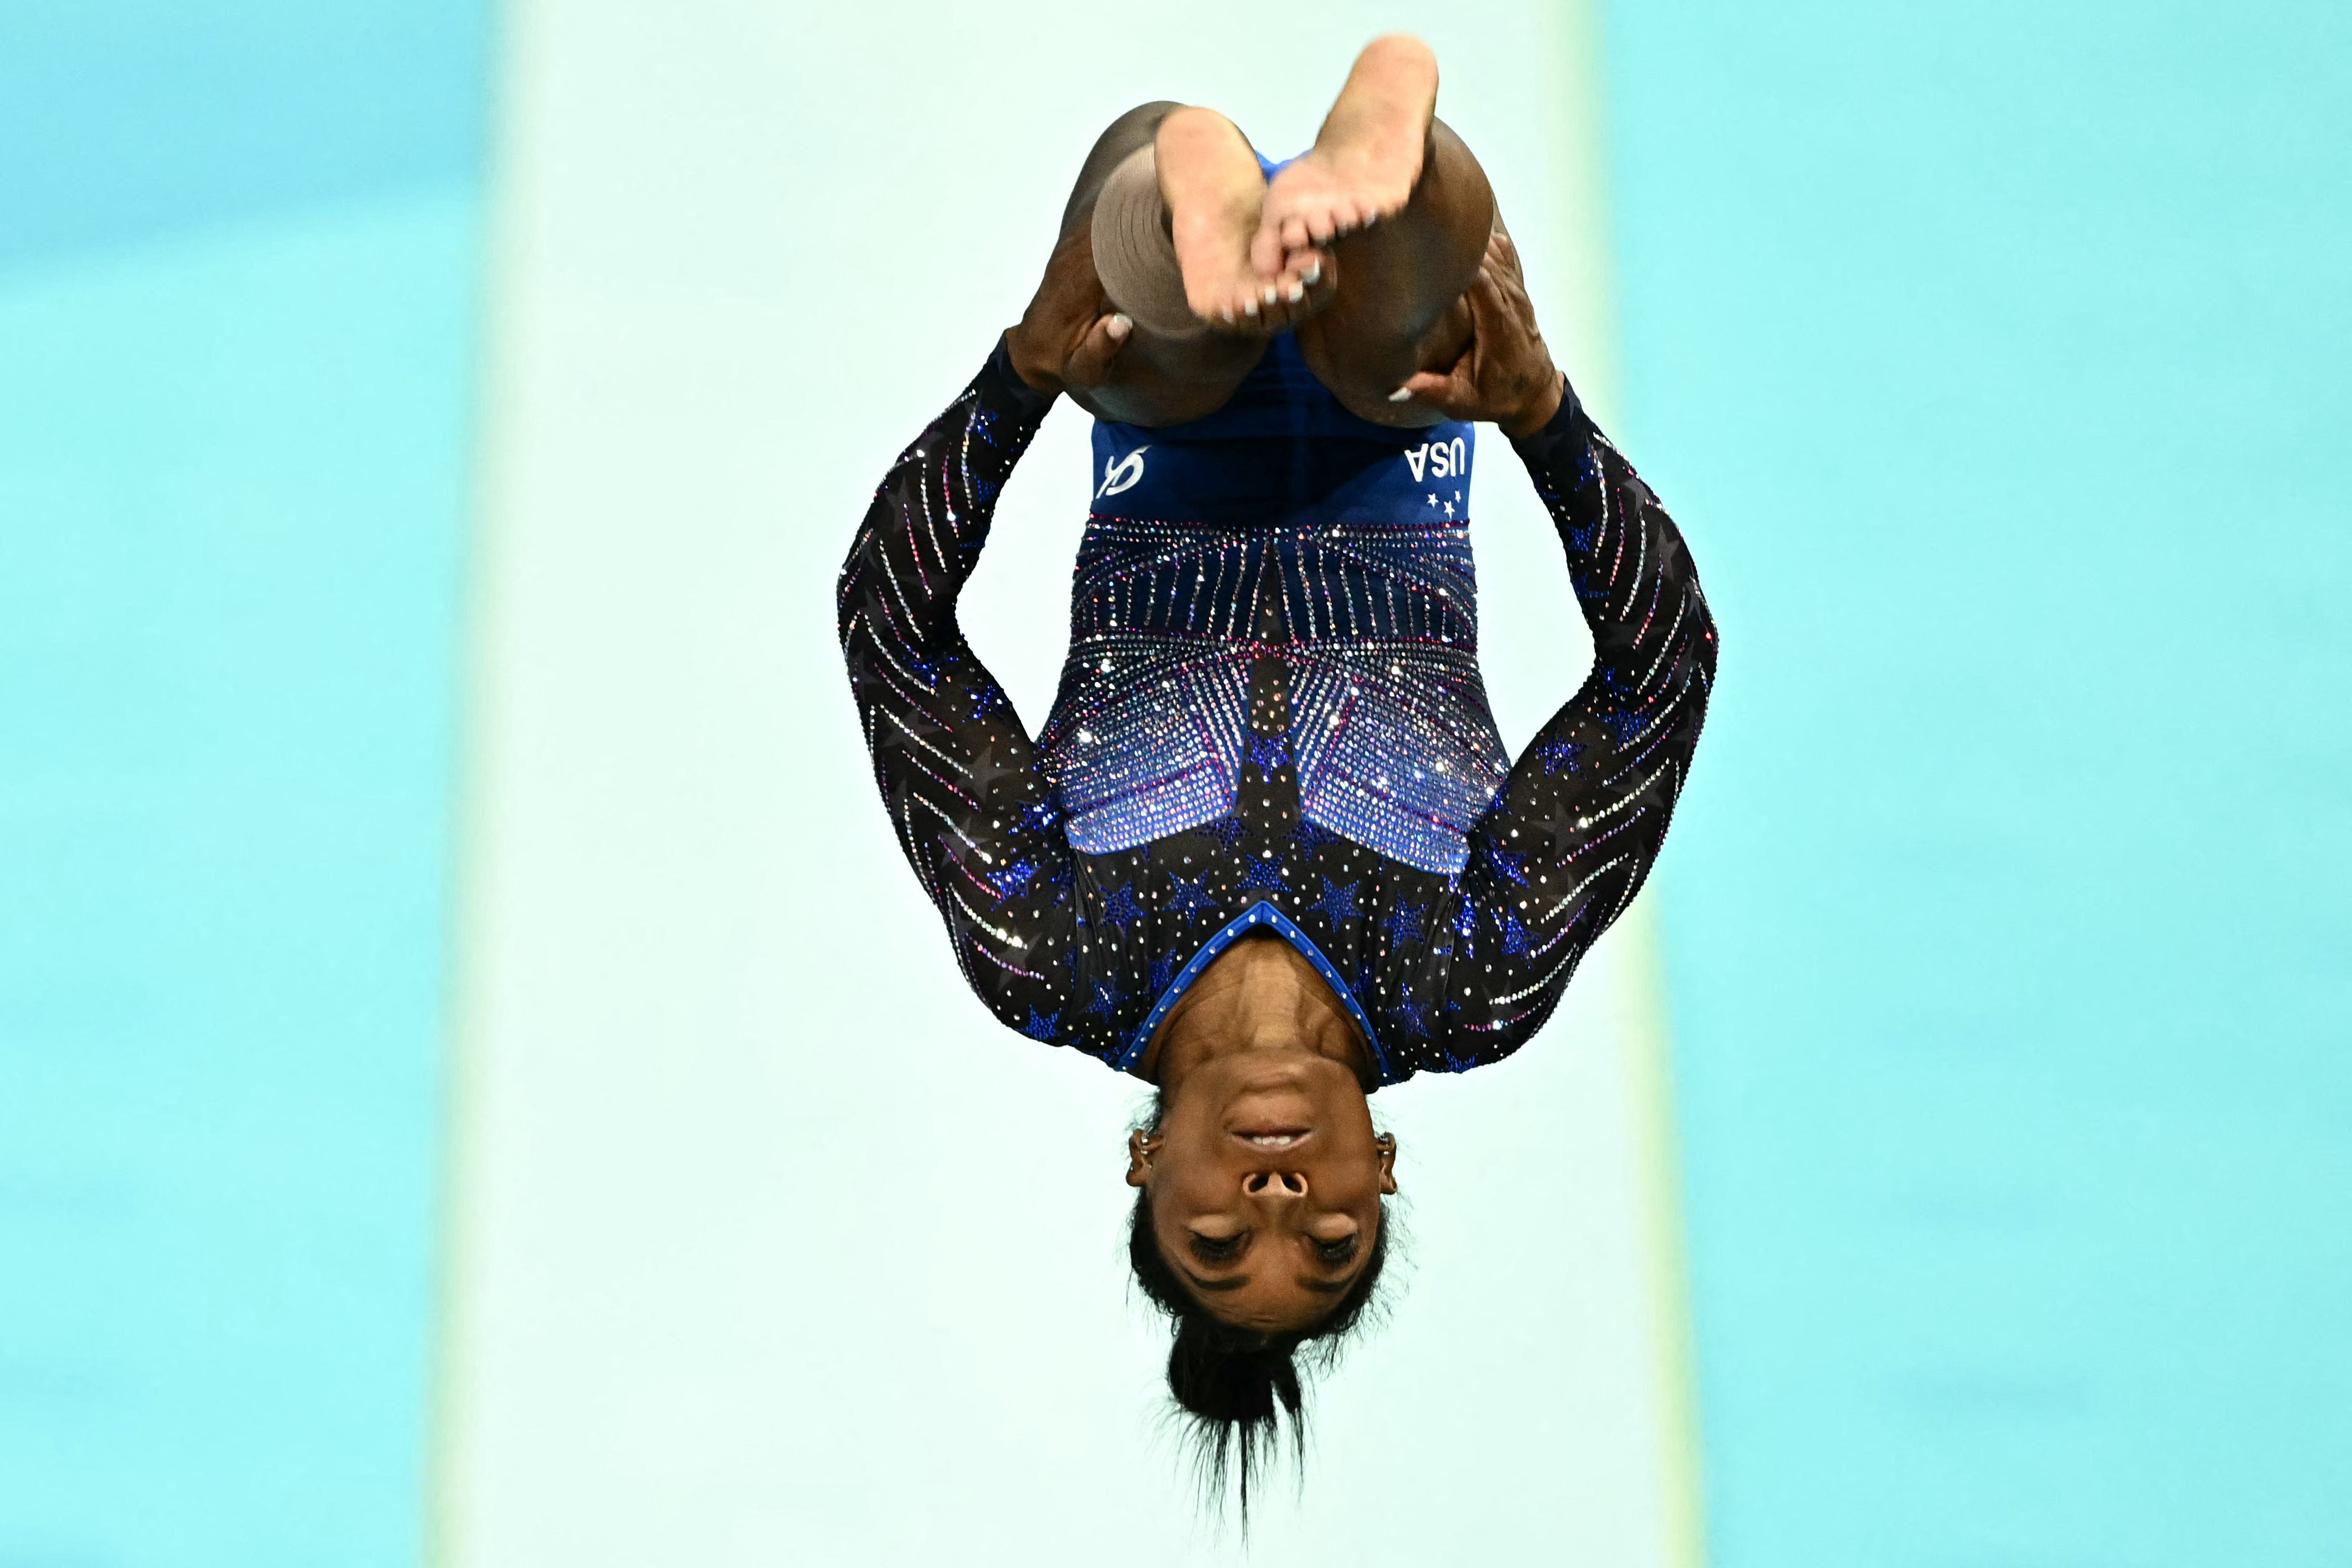 Olympic gymnastics live updates: Simone Biles, Suni Lee competing in all-around for gold